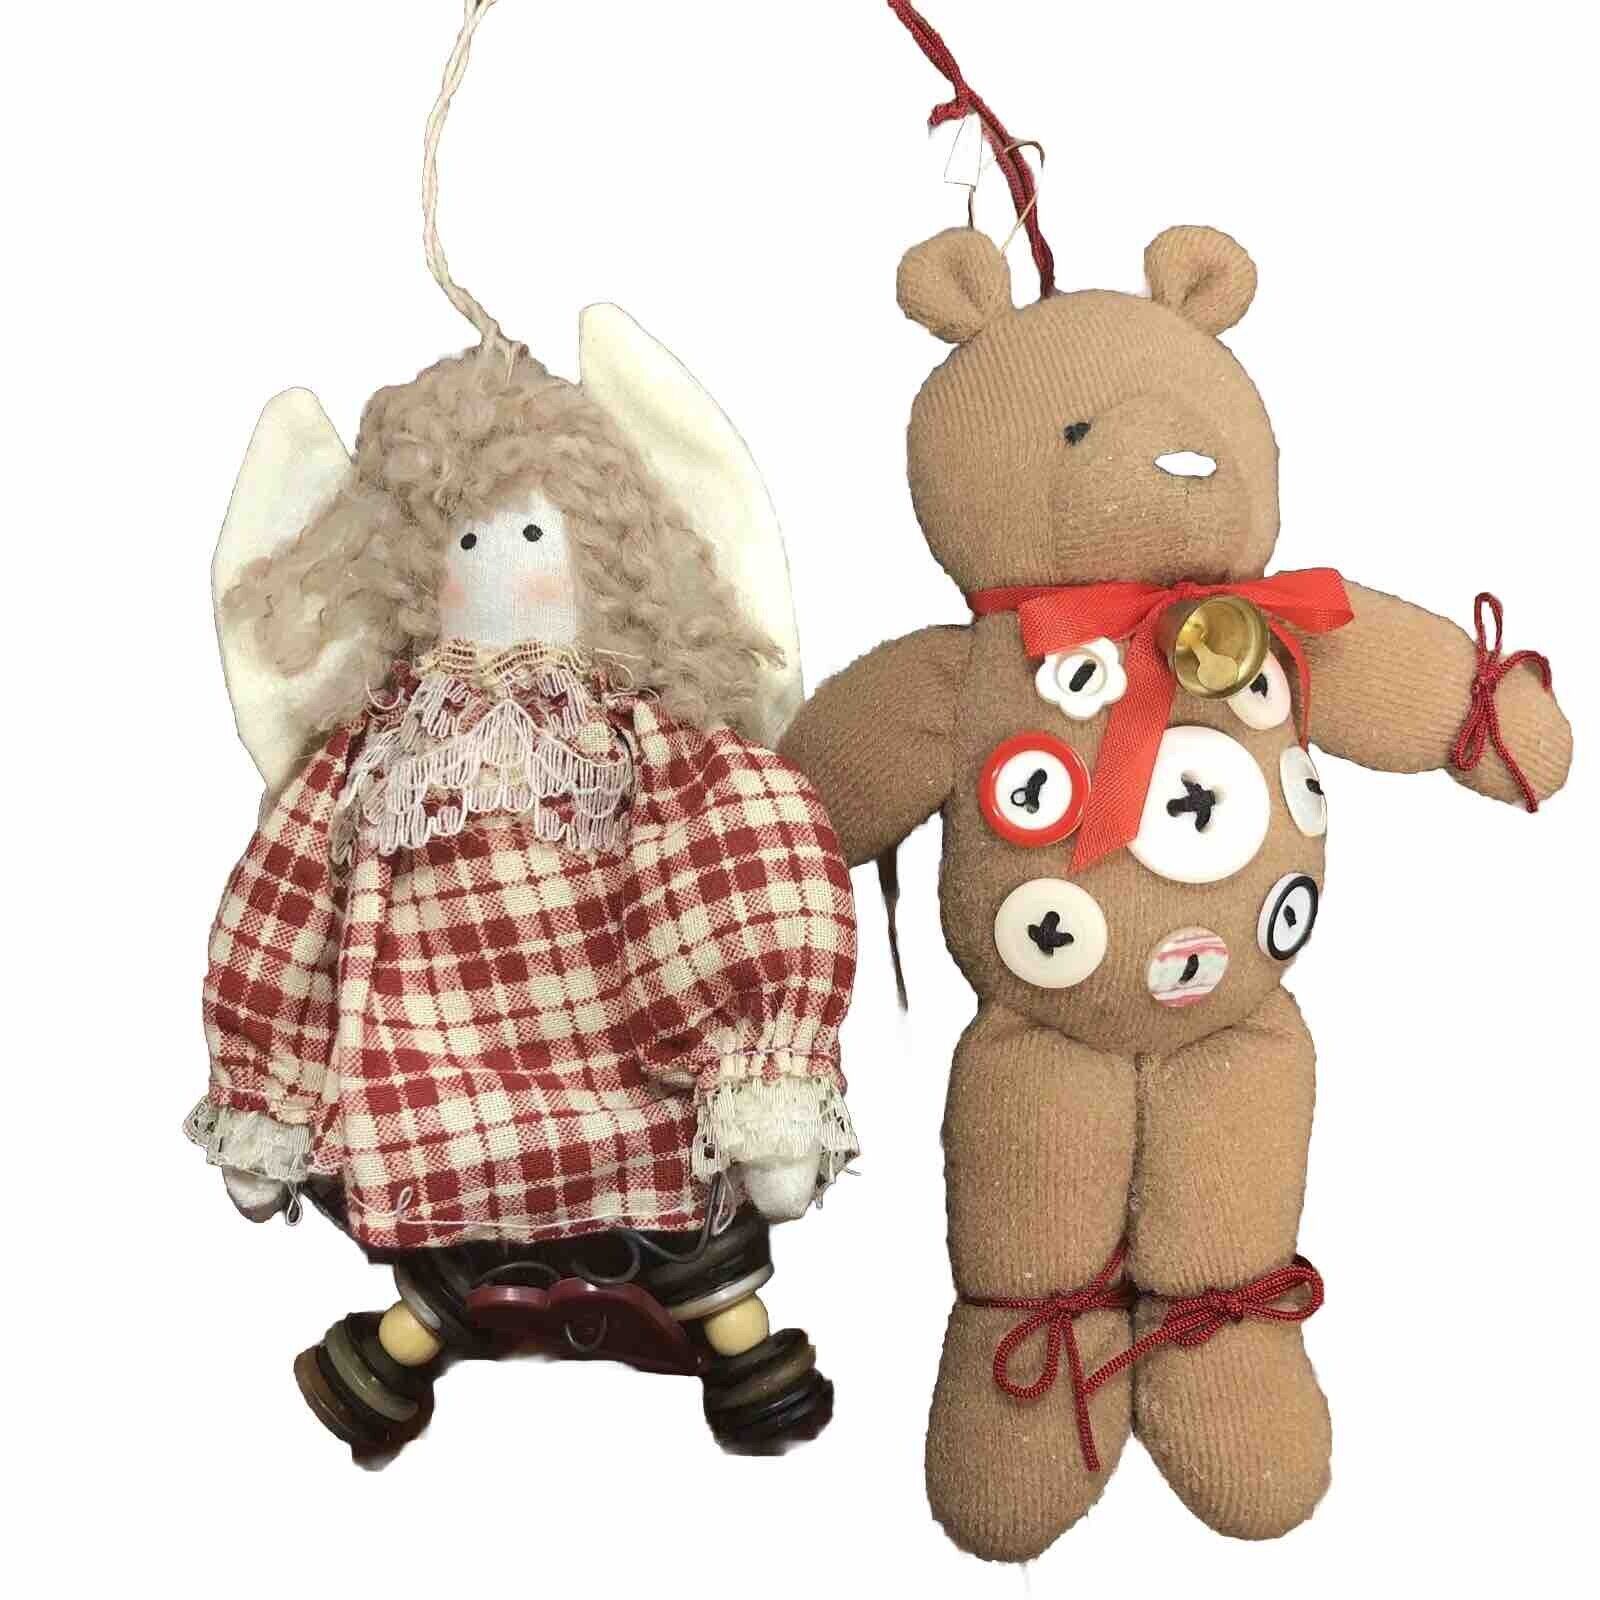 Primitive Rustic Country Christmas Ornaments W/ Buttons Angel & Bear Farmhouse